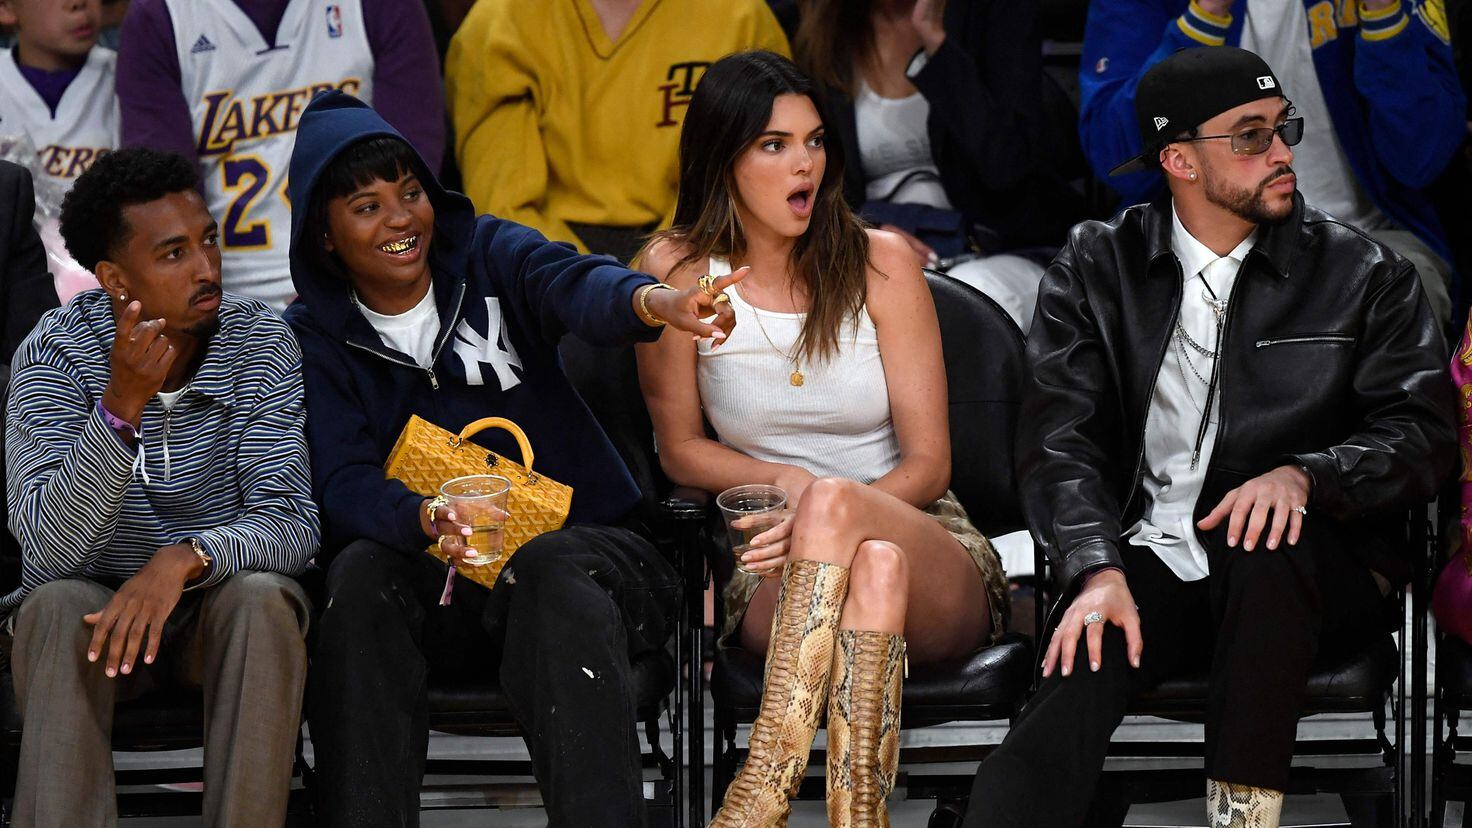 Bad Bunny and girlfriend Kendall Jenner were spotted sitting